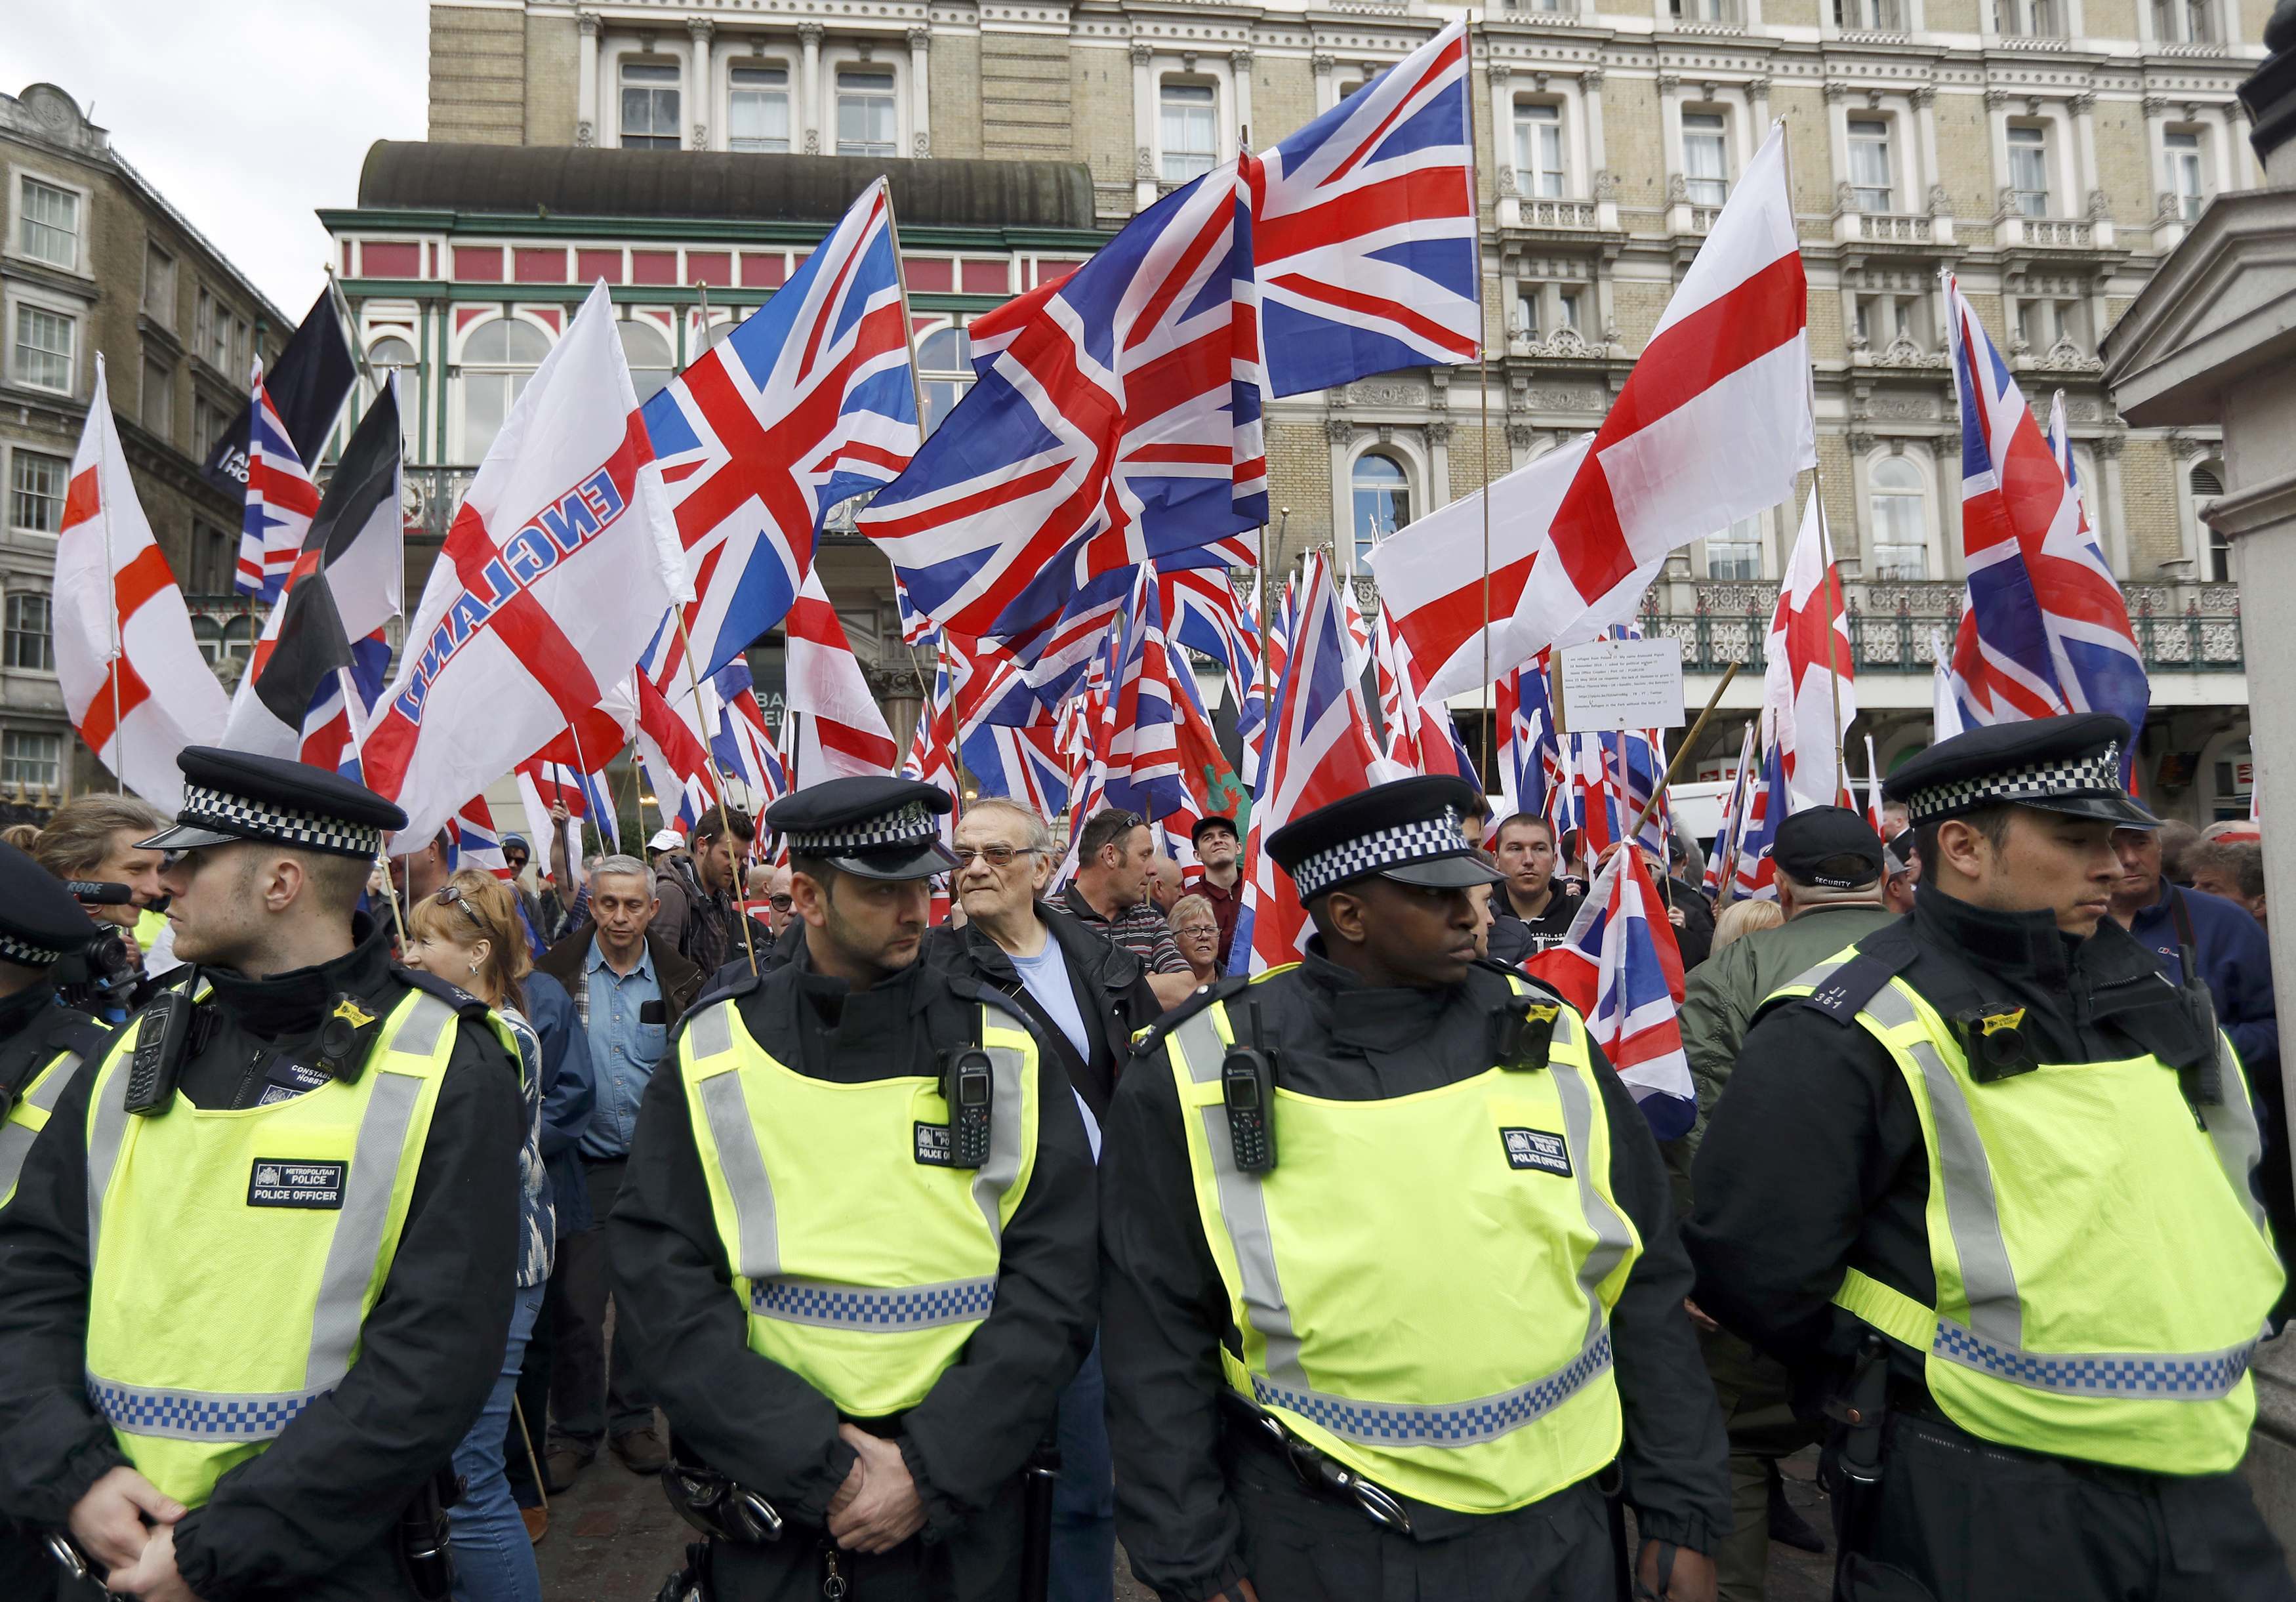 Work in britain. Britain first. Opposition Coalition по-английски. Workers in great Britain. МО Vancouver Organization offers New look at first far-right Group on Canada.